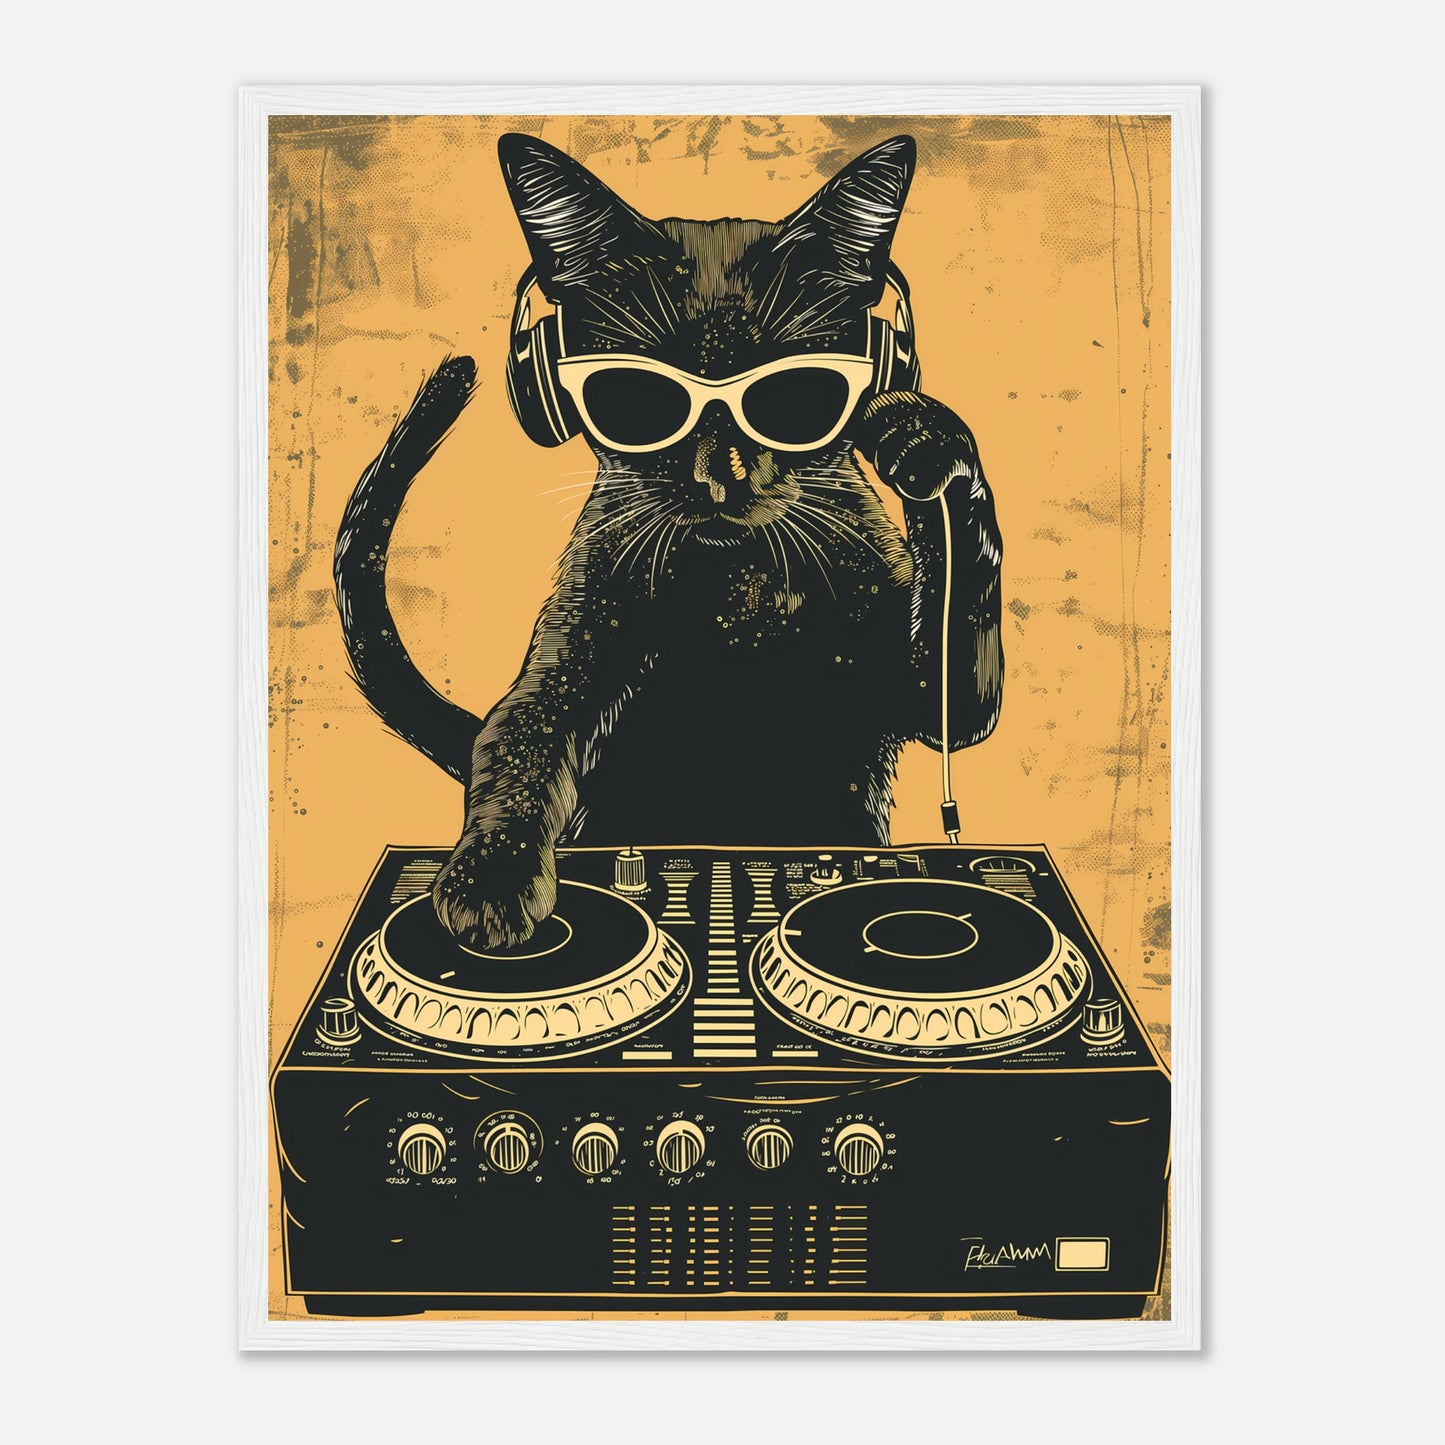 A stylized illustration of a cat with sunglasses DJing on turntables.